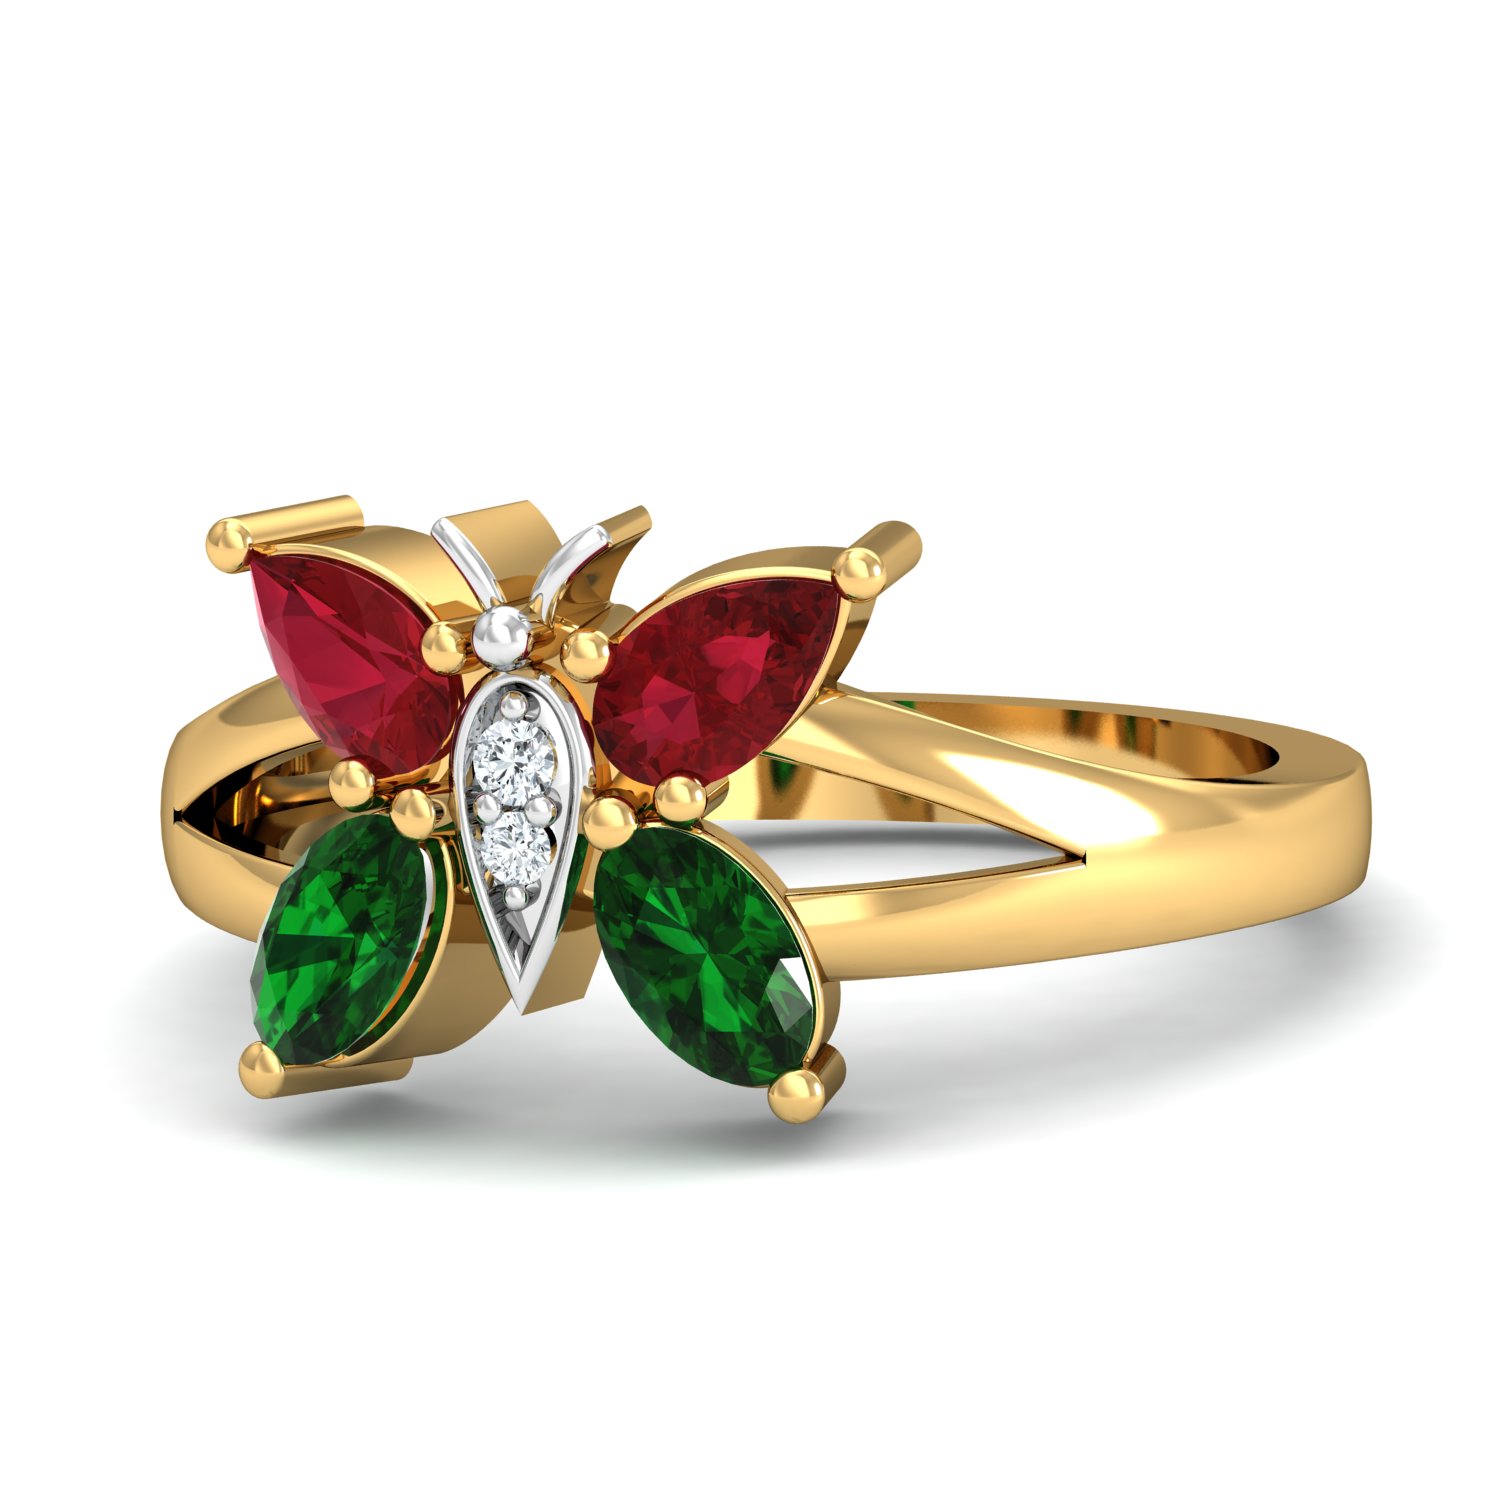 Natural Emerald, Ruby & Sapphire Ring in 18k Pure Gold - Meerah - By Monika